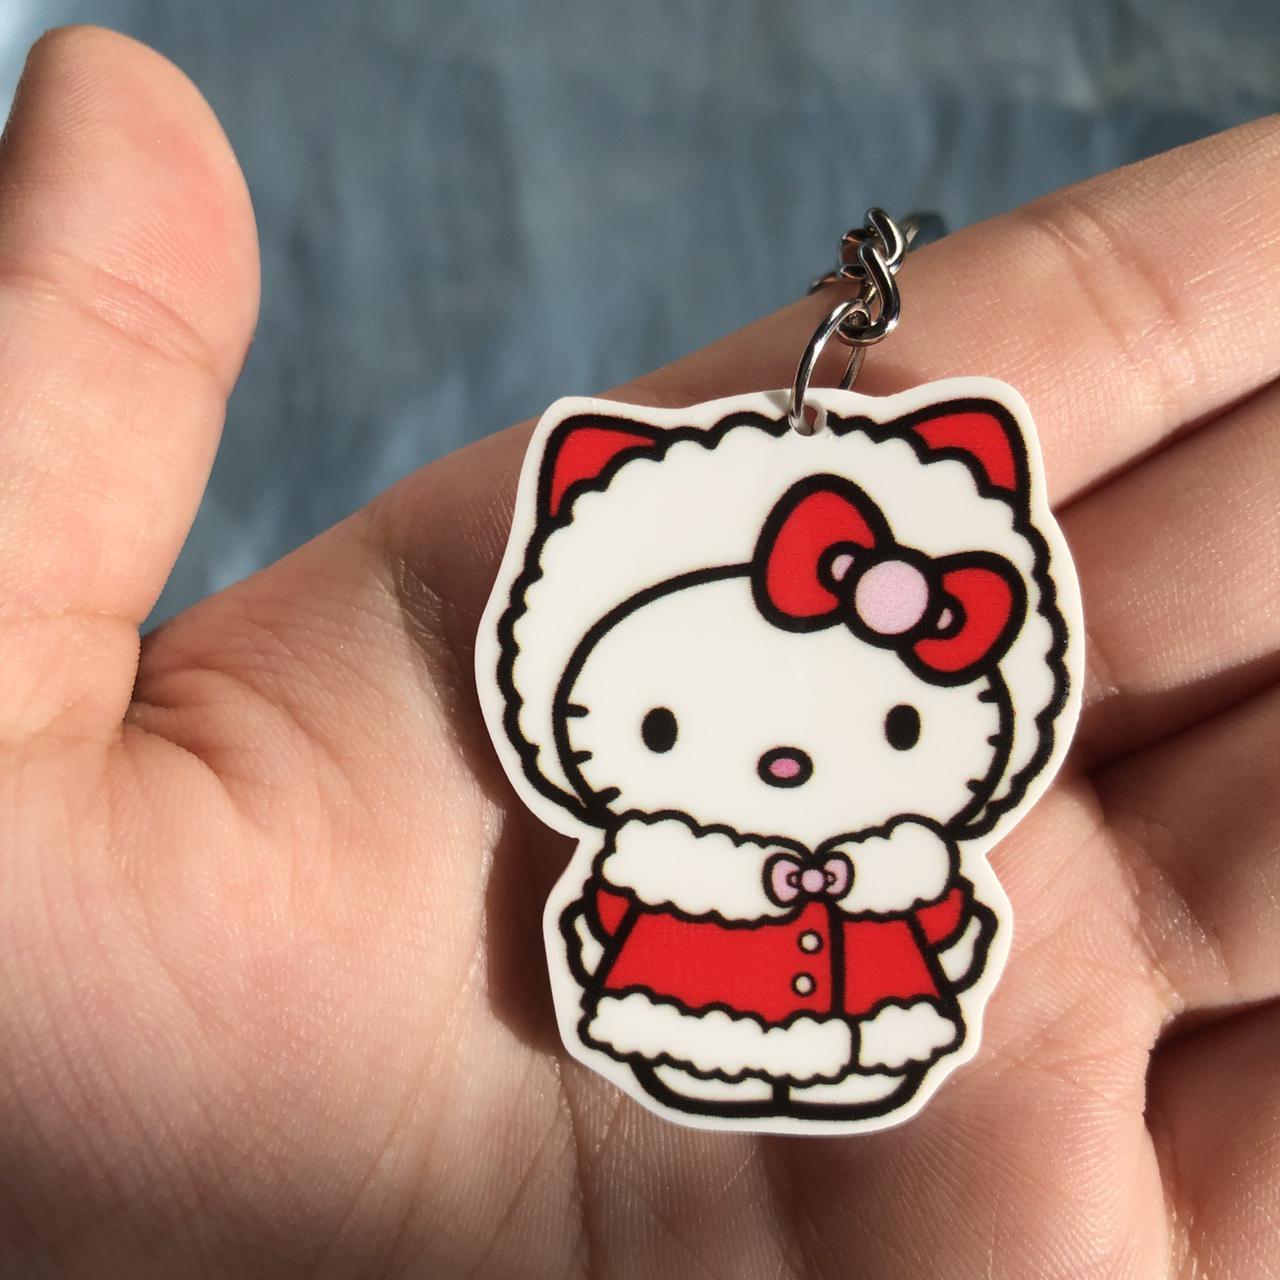 Product Image 2 - -Hello kitty keychain
-Shipping is $3.50
-All